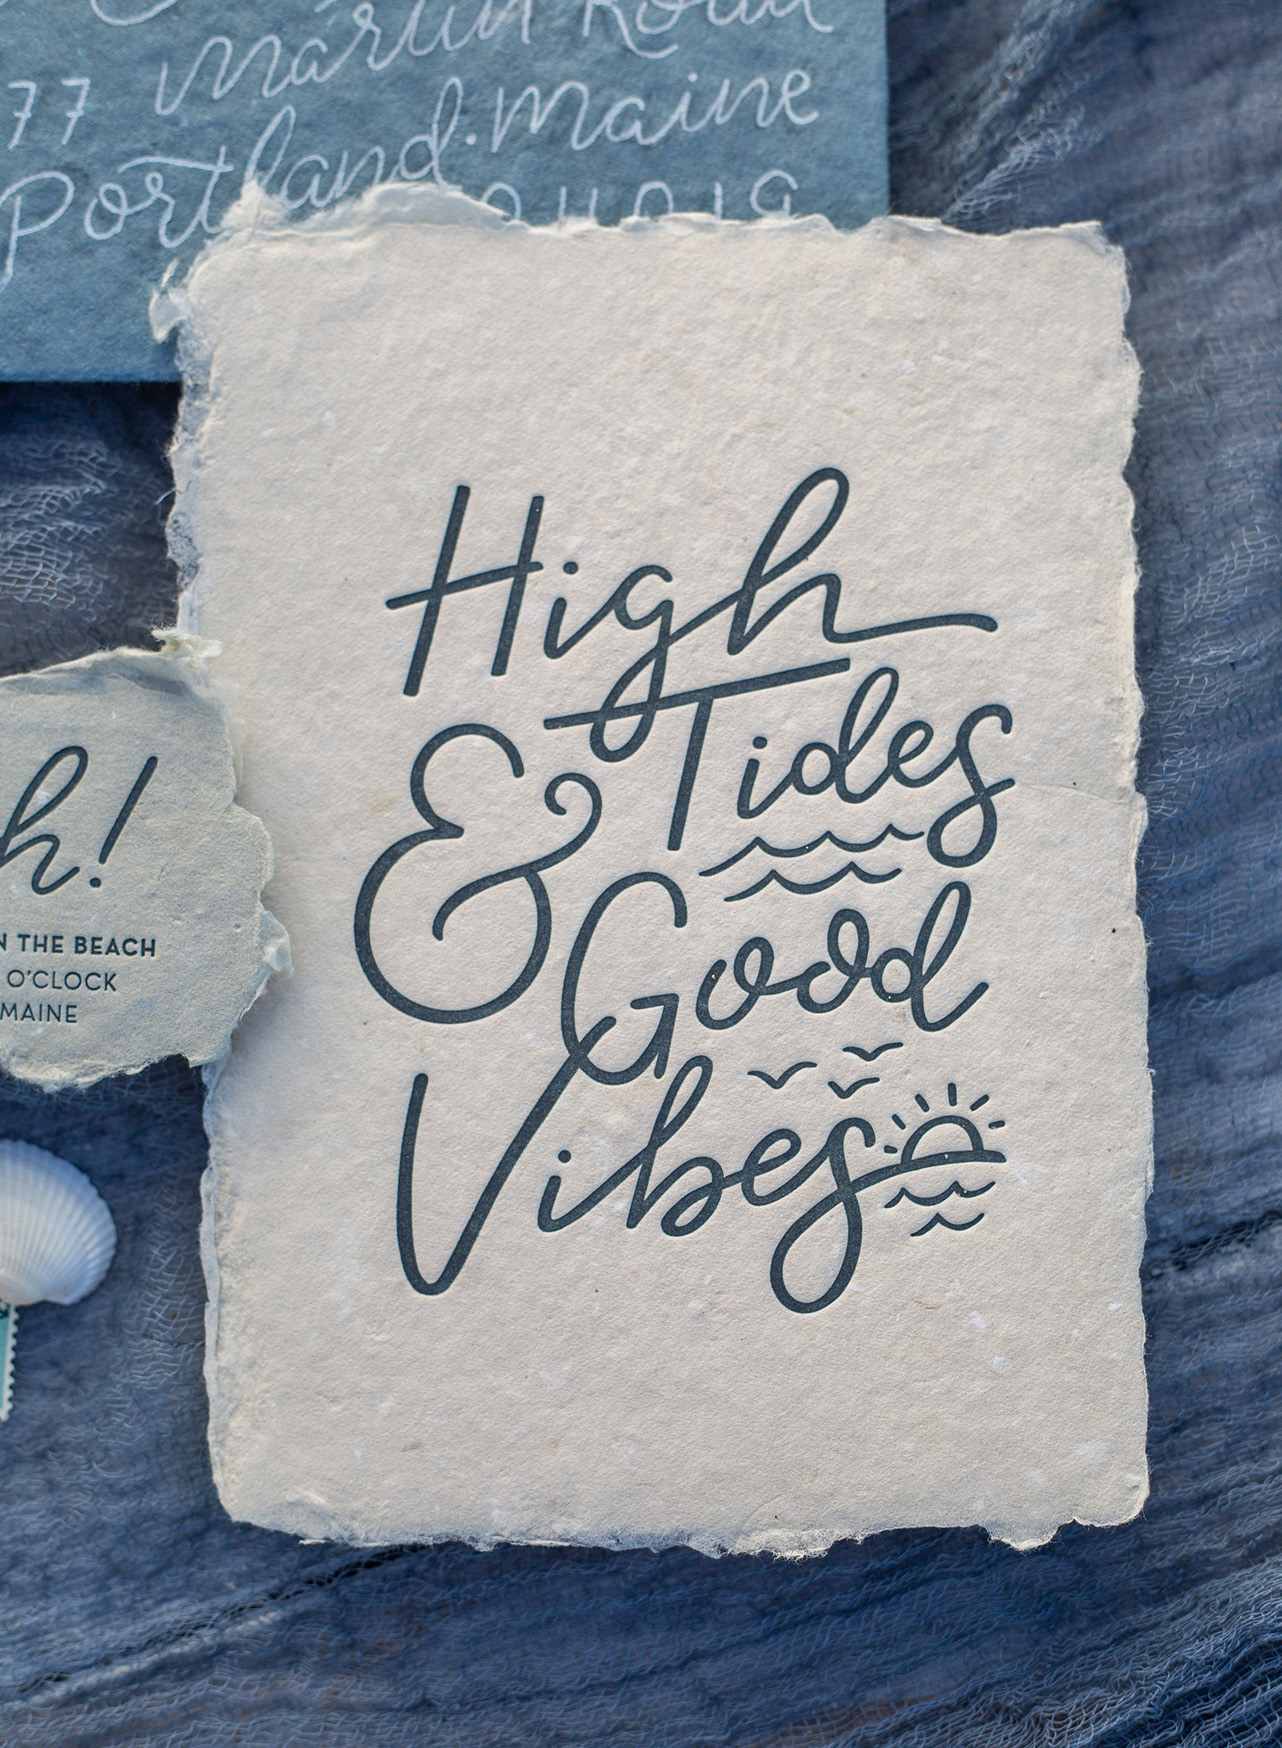 Seaside Brunch Invitations by The Chatty Press